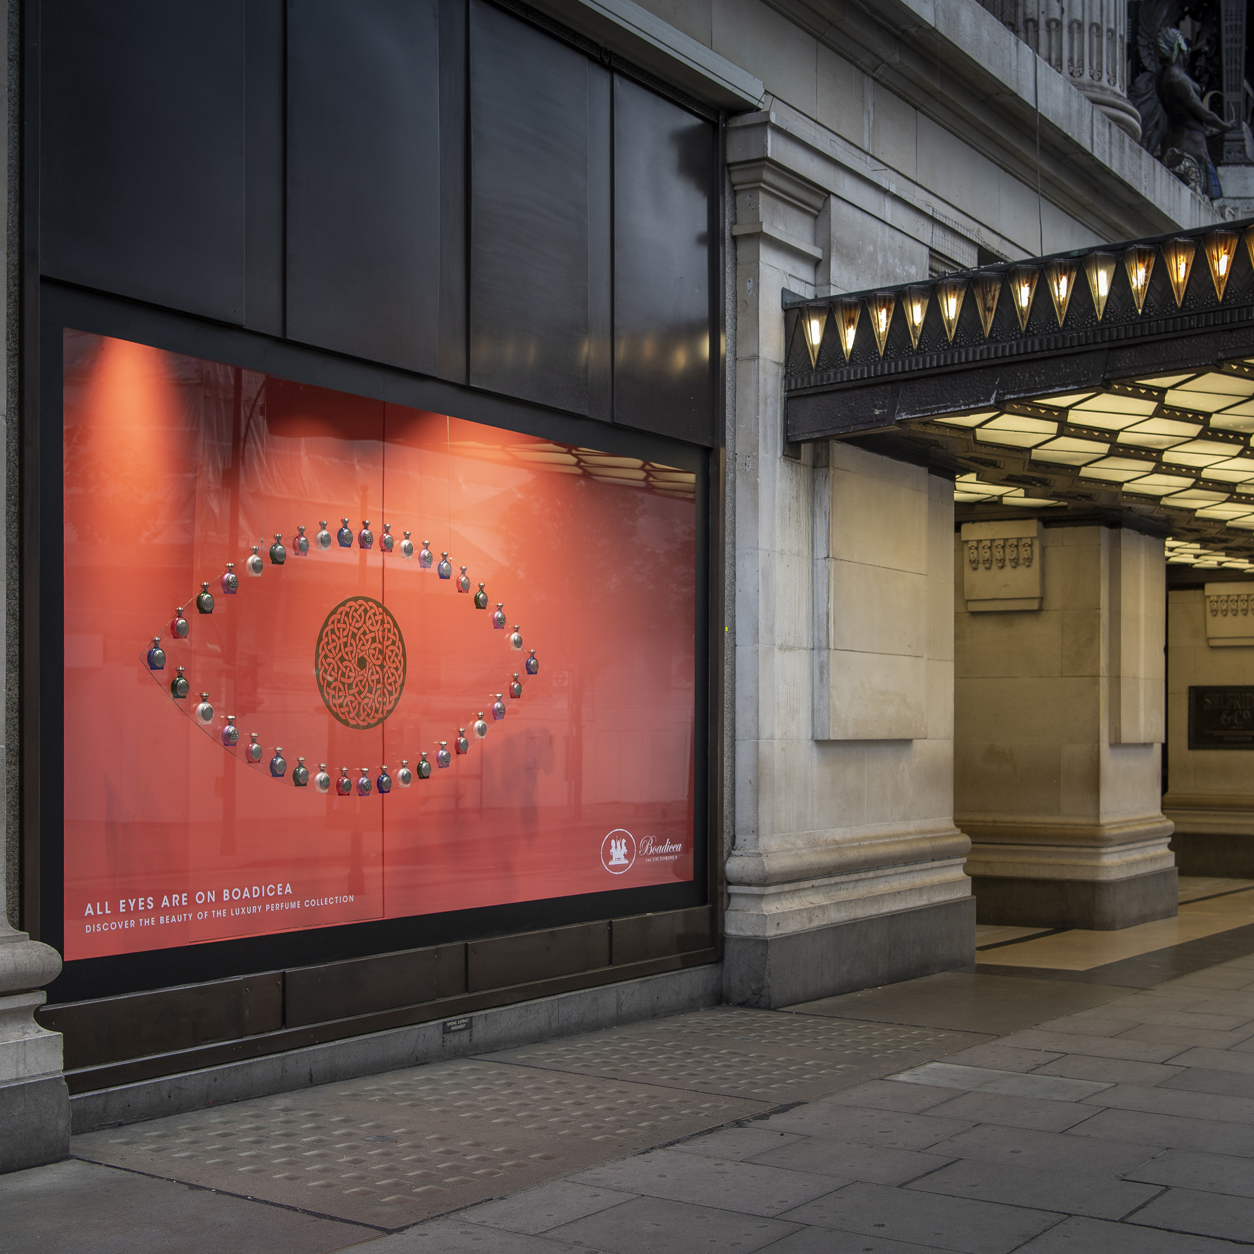 All eyes are on Boadicea the Victorious as Selfridges London unveils new window display